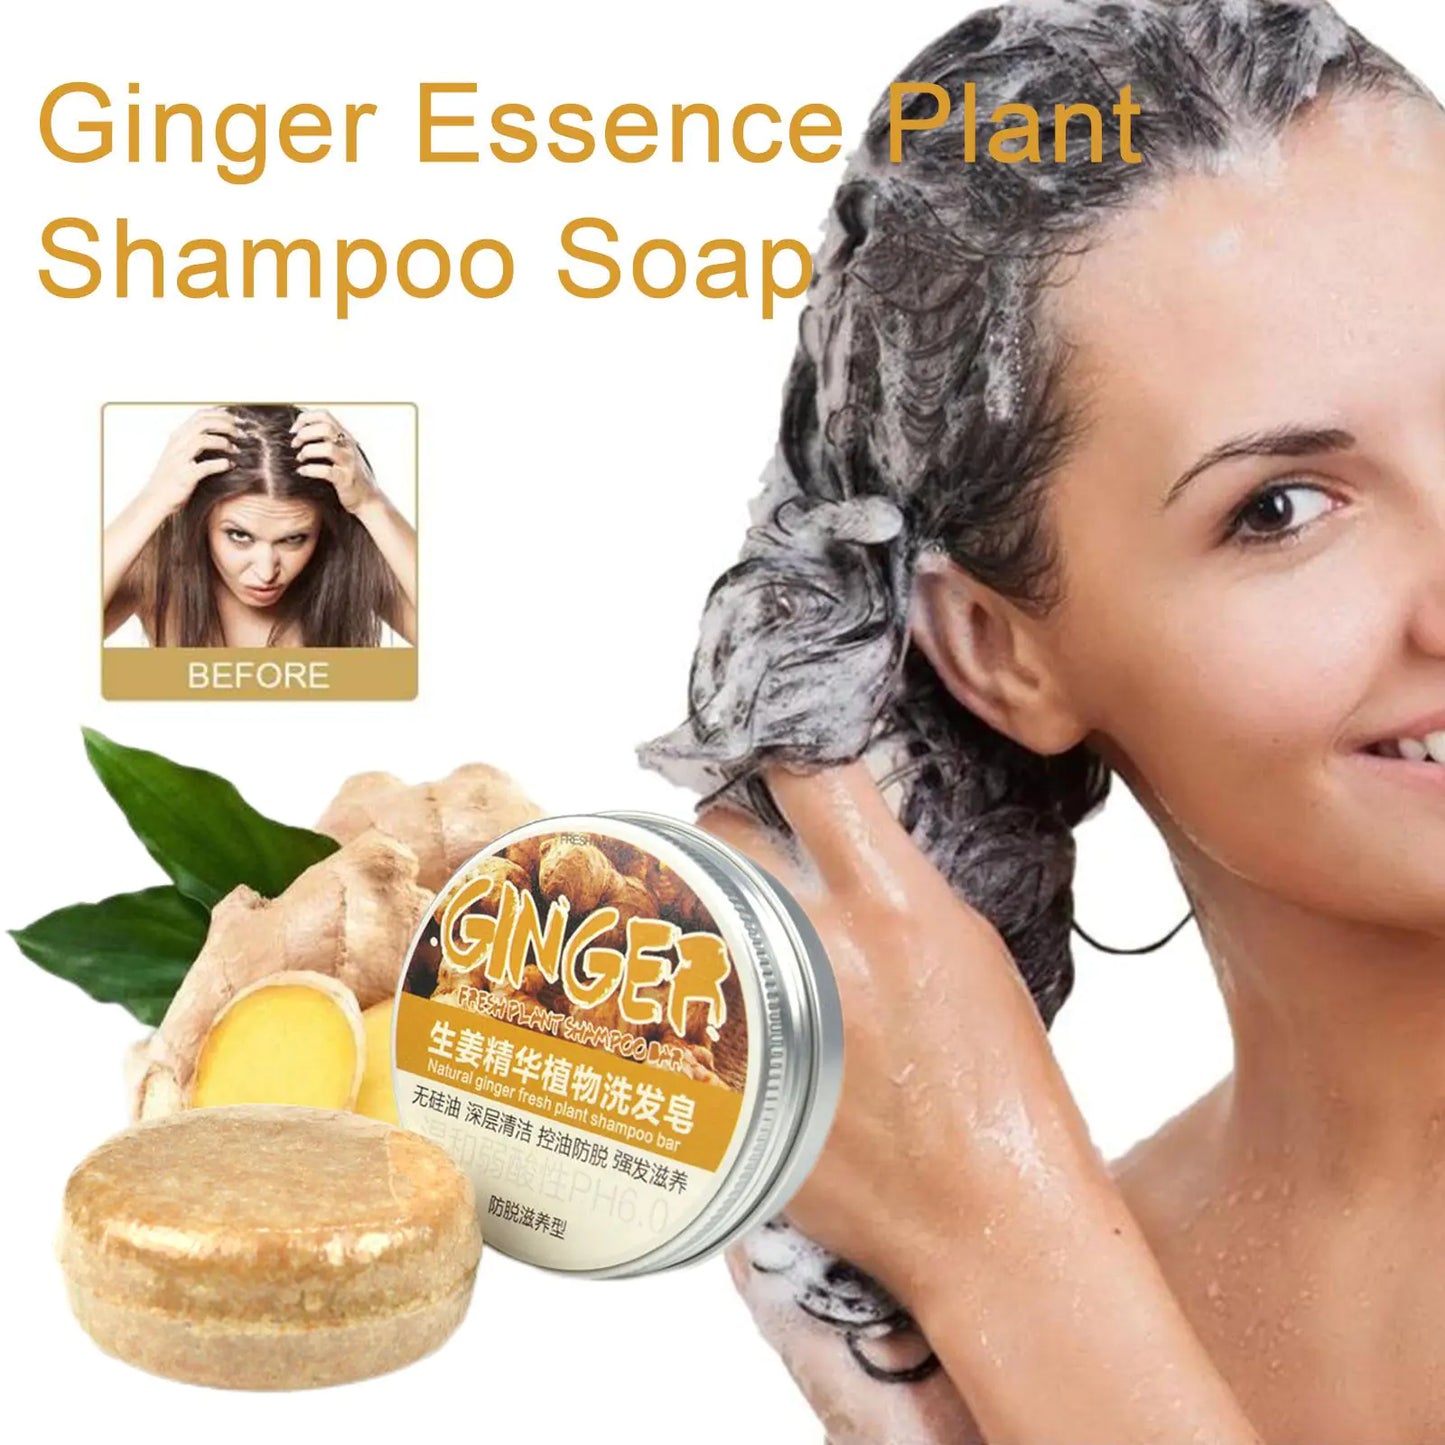 Sacred Scents Soap: Ginger Polygonum Hair Growth Soap Shampoo